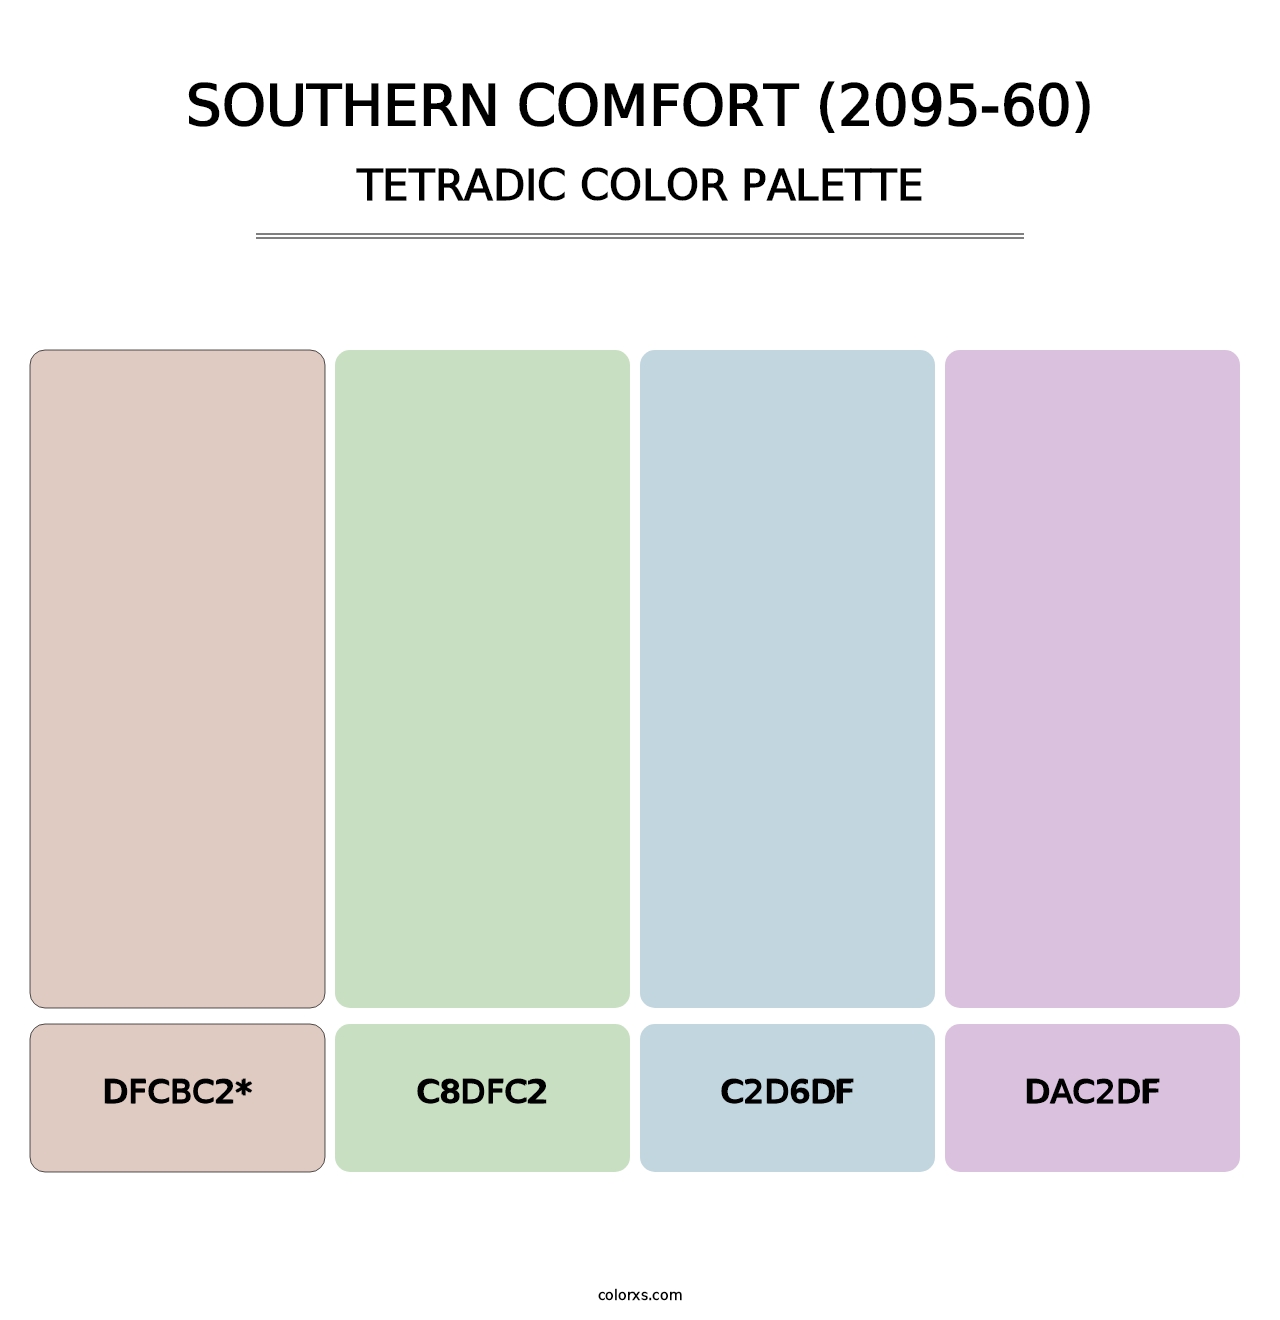 Southern Comfort (2095-60) - Tetradic Color Palette